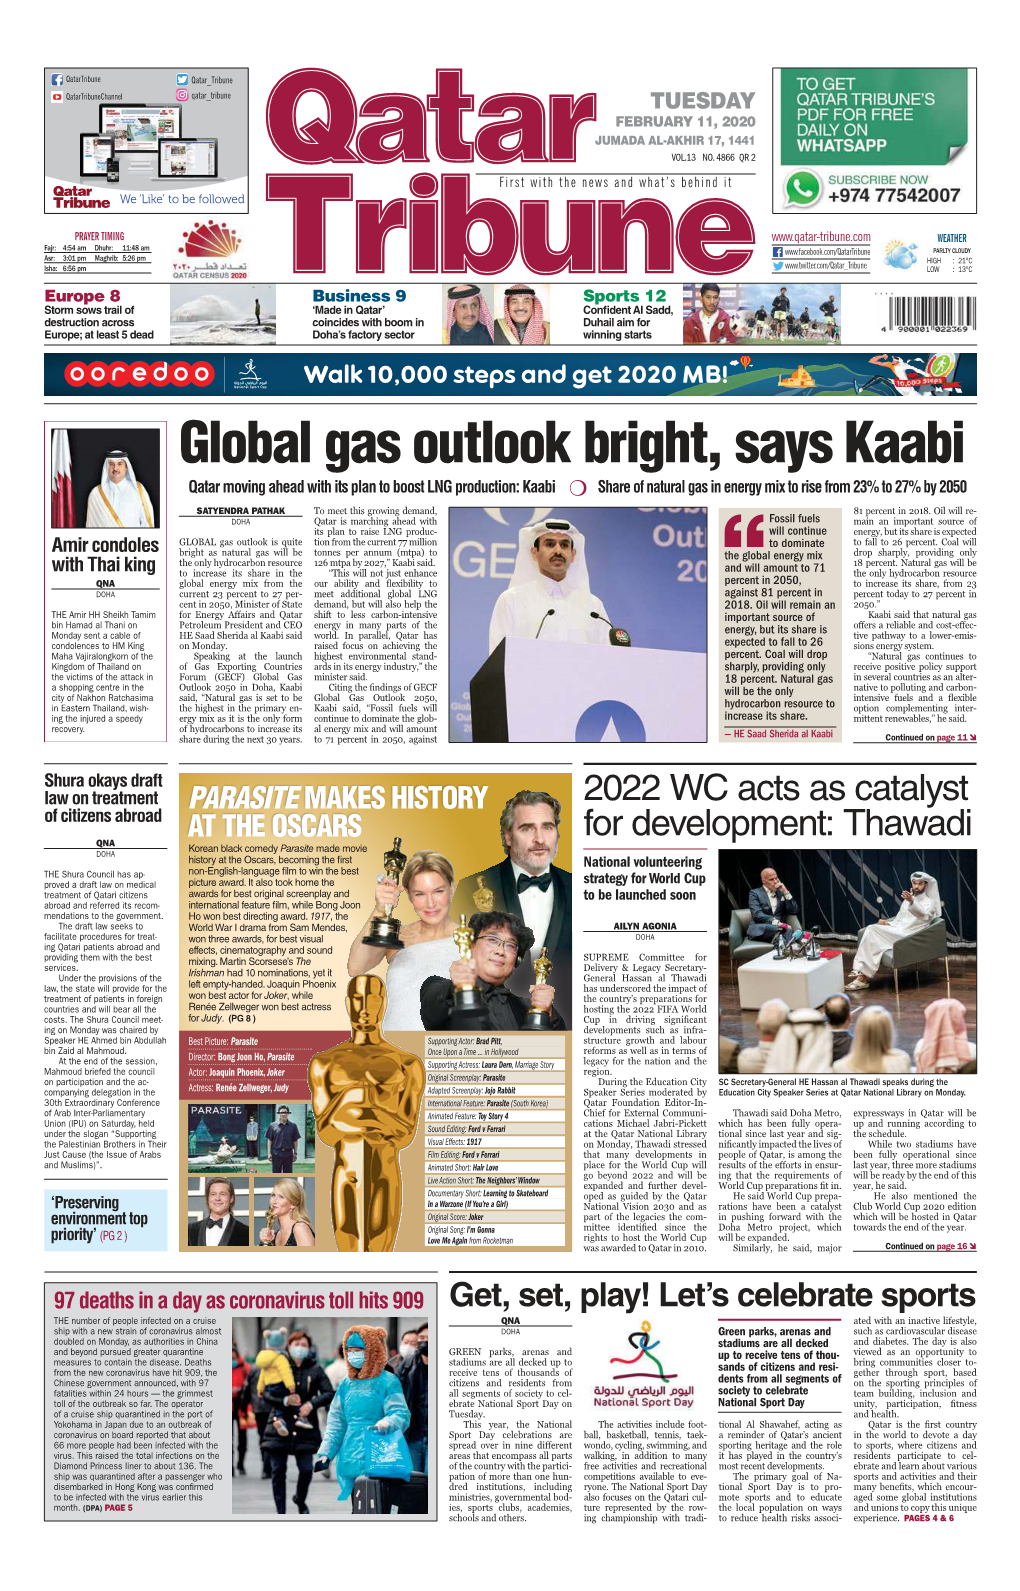 Global Gas Outlook Bright, Says Kaabi